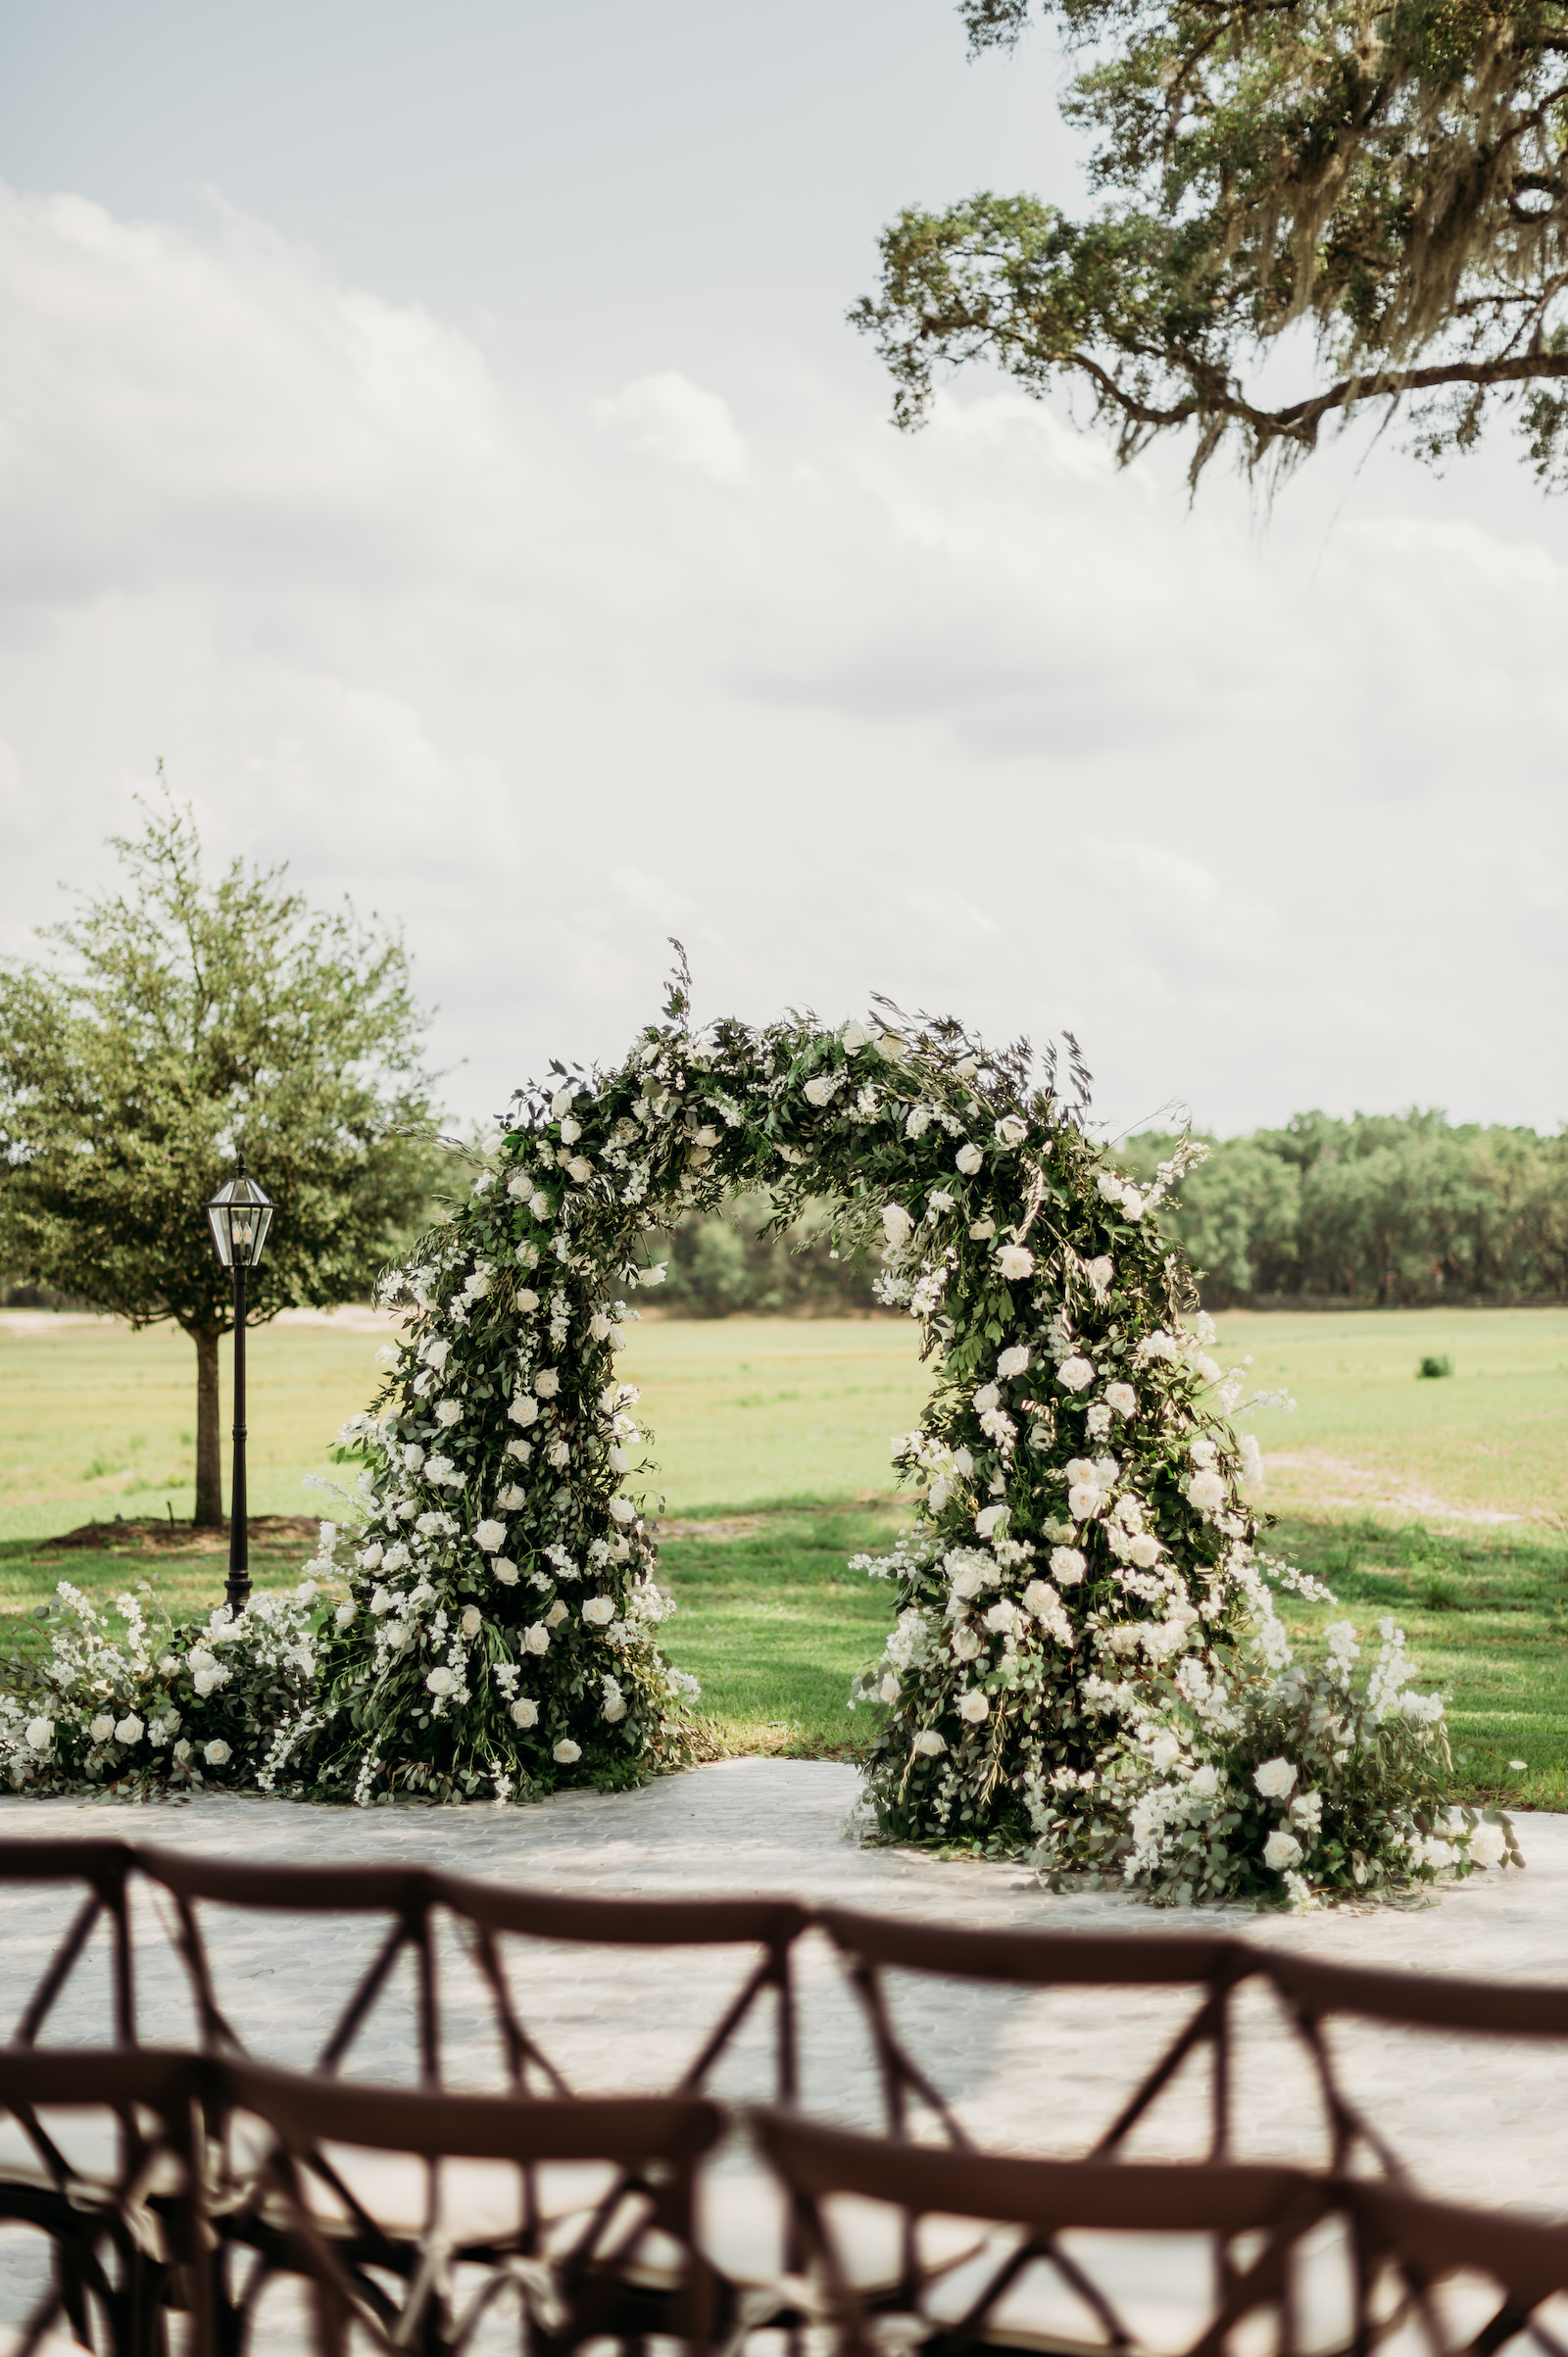 Classic Tampa Wedding Ceremony Decor, Lush Greenery and White Floral Arch